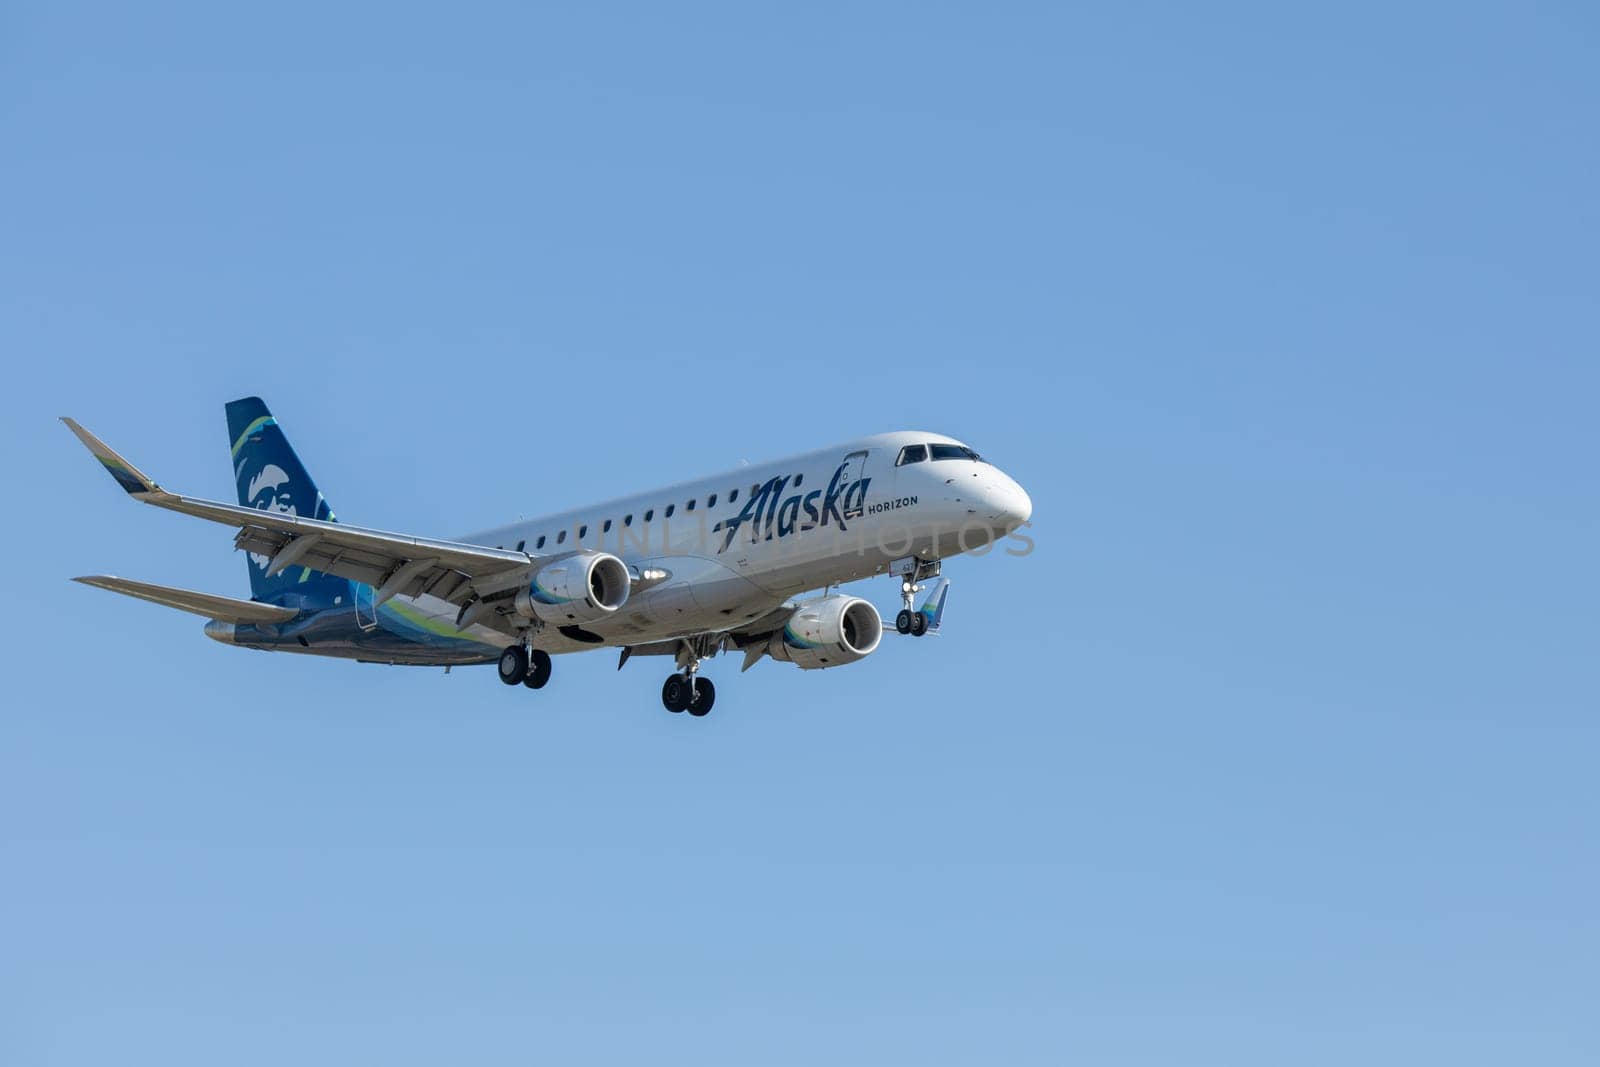 BOISE, IDAHO - May 23, 2023: Alaska Airlines flight operated by Horizon landing at the Boise airport